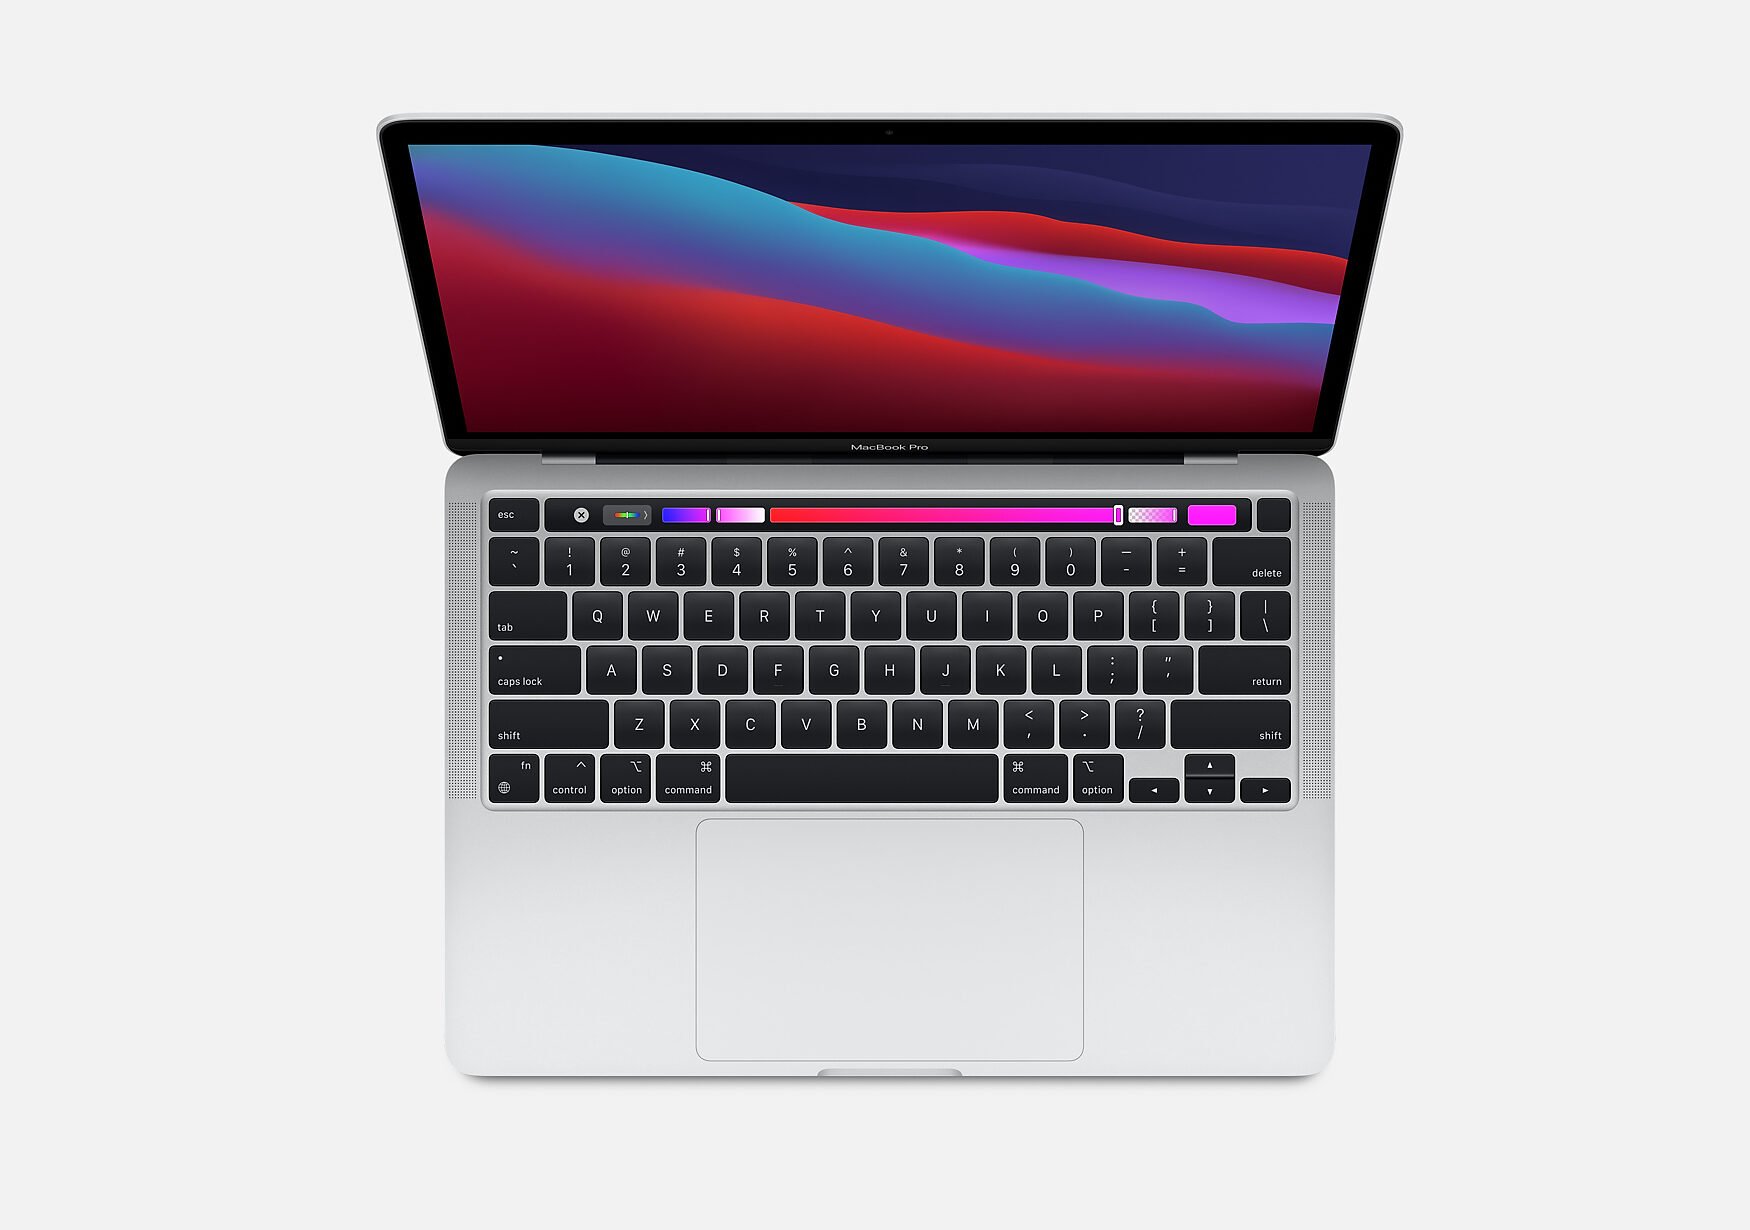 Apple MacBook Pro might see significant gains with next M1 chip